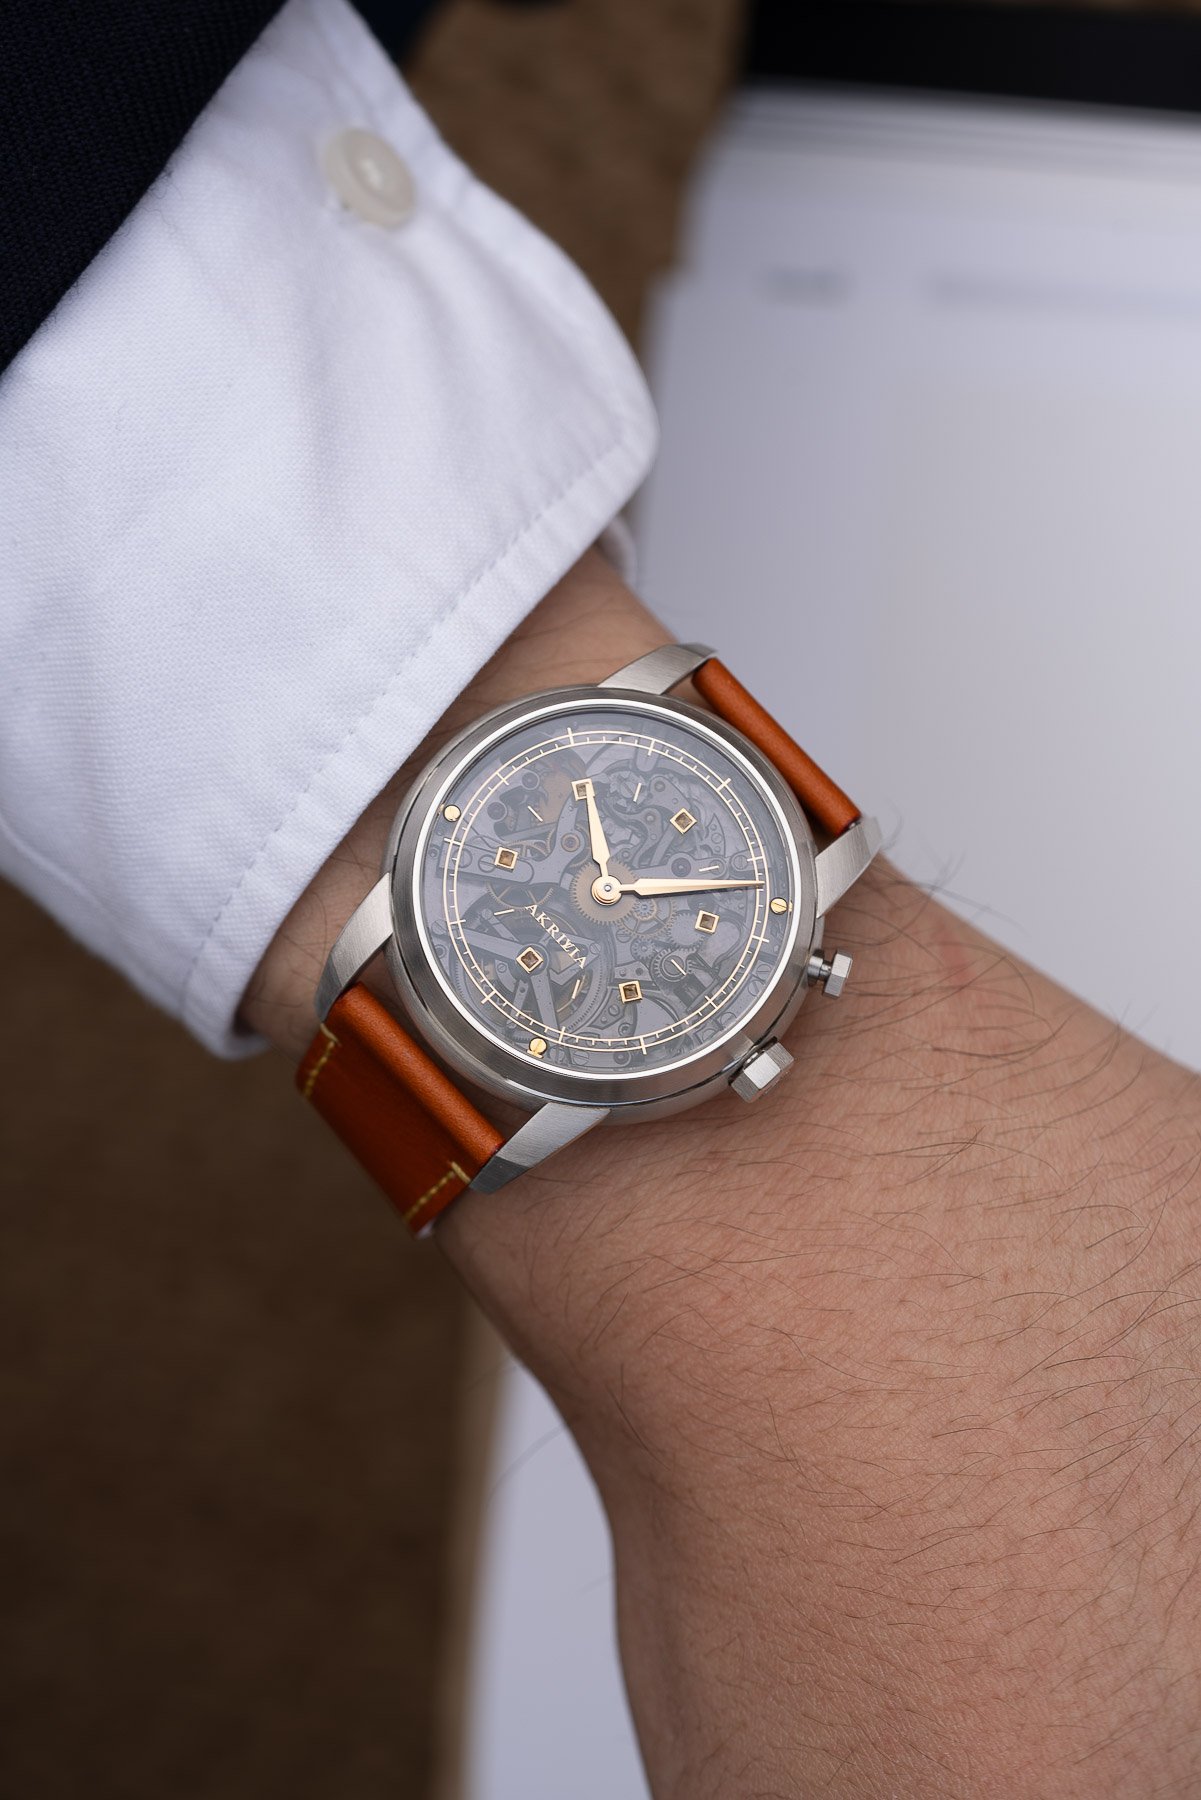 Hands-On Debut: The Louis Vuitton X Akrivia LVRR-01 Chronograph Á